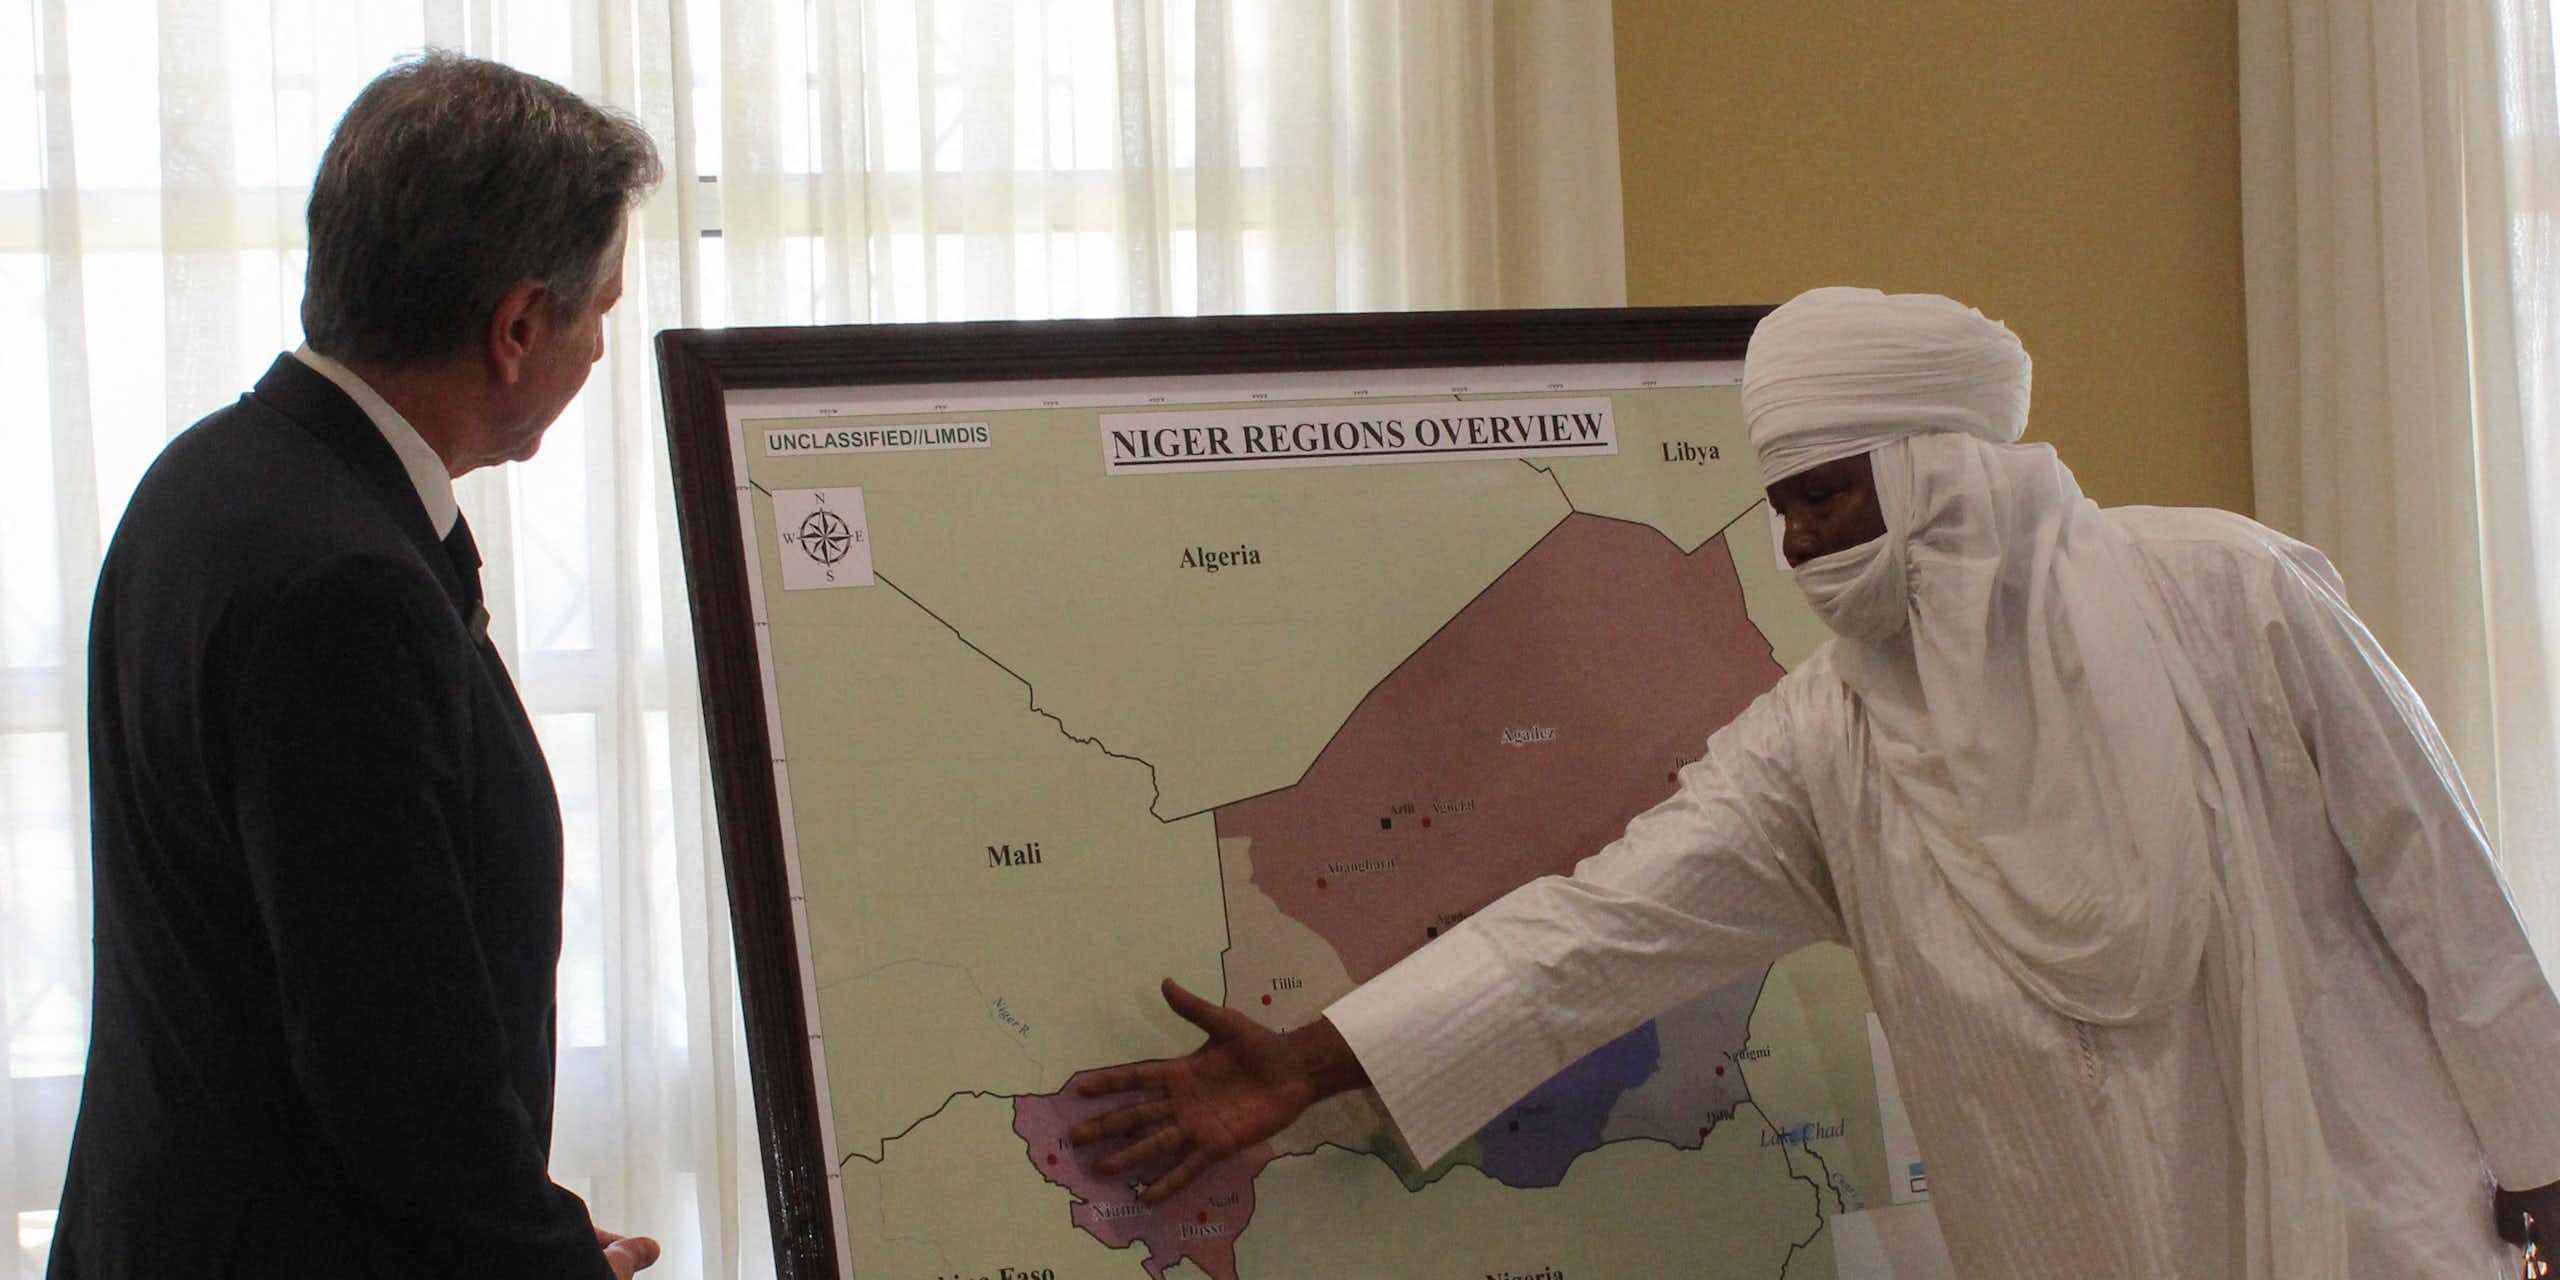 A man covered in white cloth gestures to a map of Niger and the surrounding region while another man in a suit looks on.